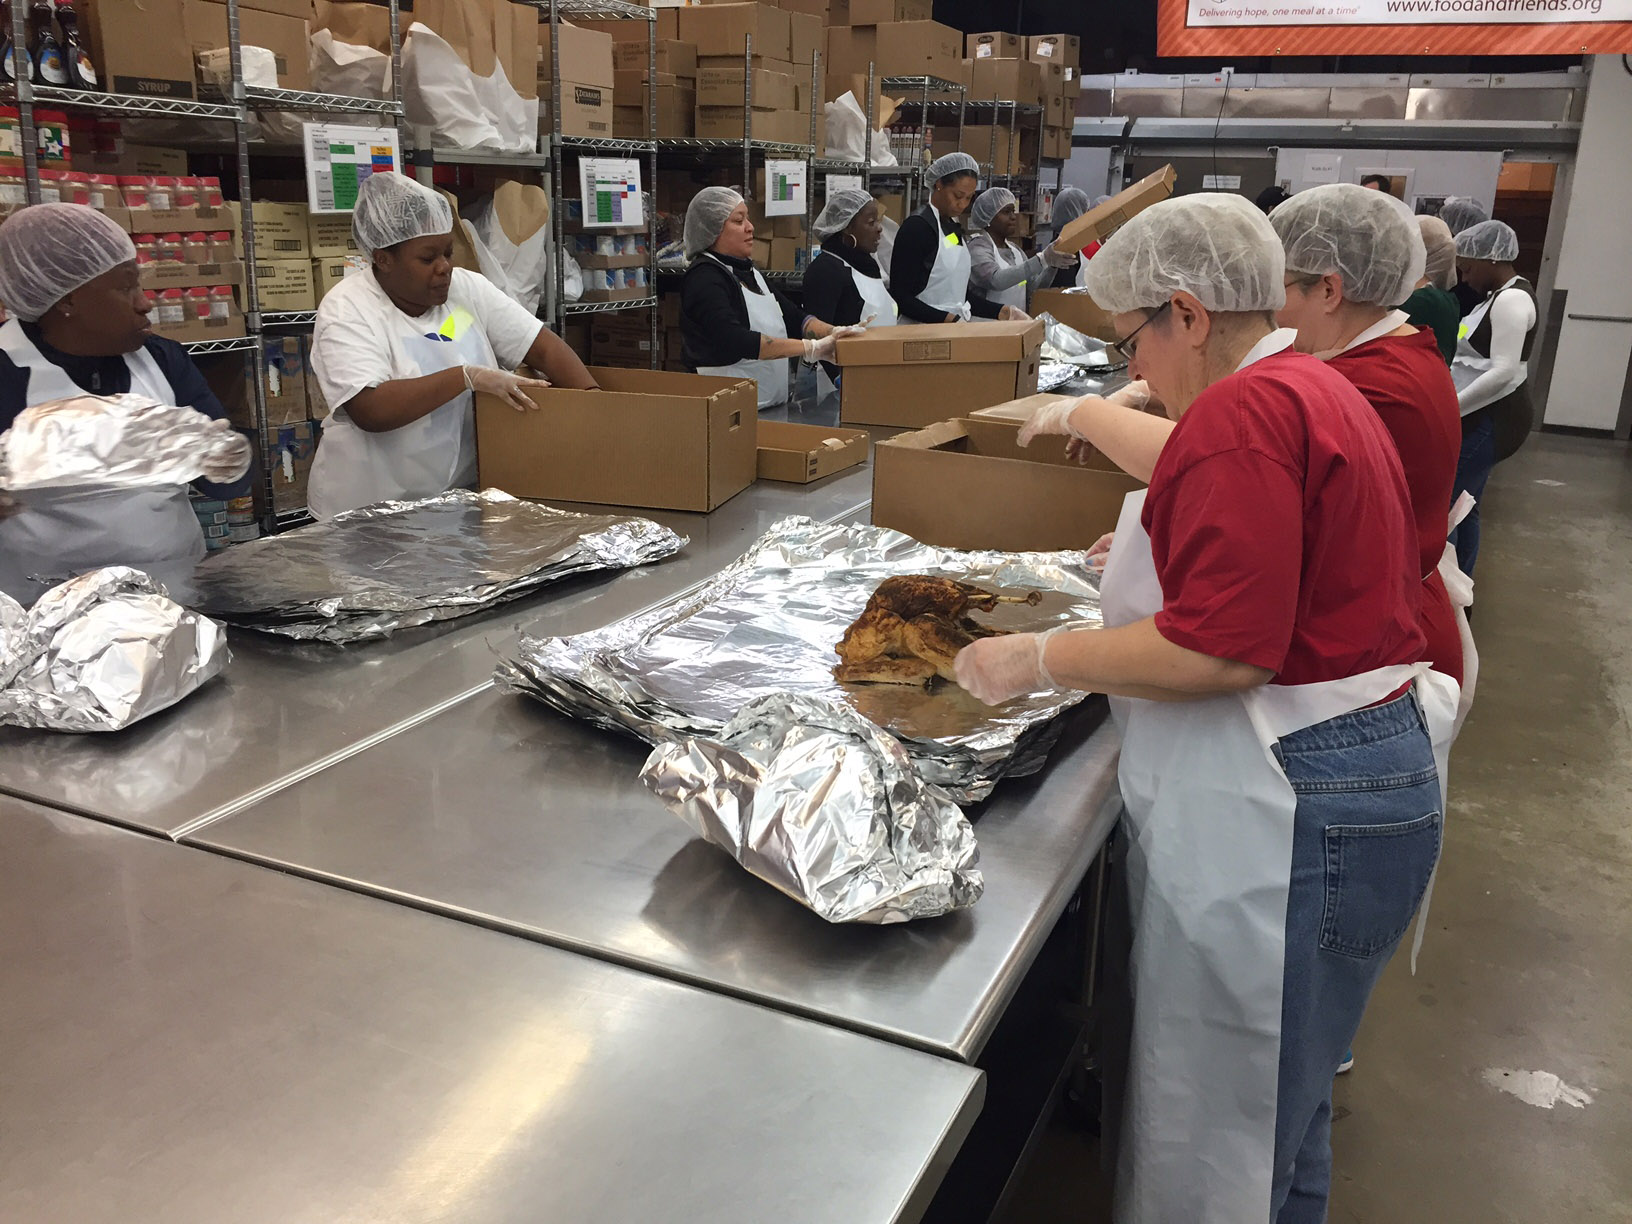 Volunteers pack meals for 3,500 people at Food &amp; Friends in Northeast D.C. on Thursday morning. More than 450 volunteers will help prepare and deliver the Thanksgiving meals to those suffering from chronic illnesses like cancer and HIV. (WTOP/John Domen)